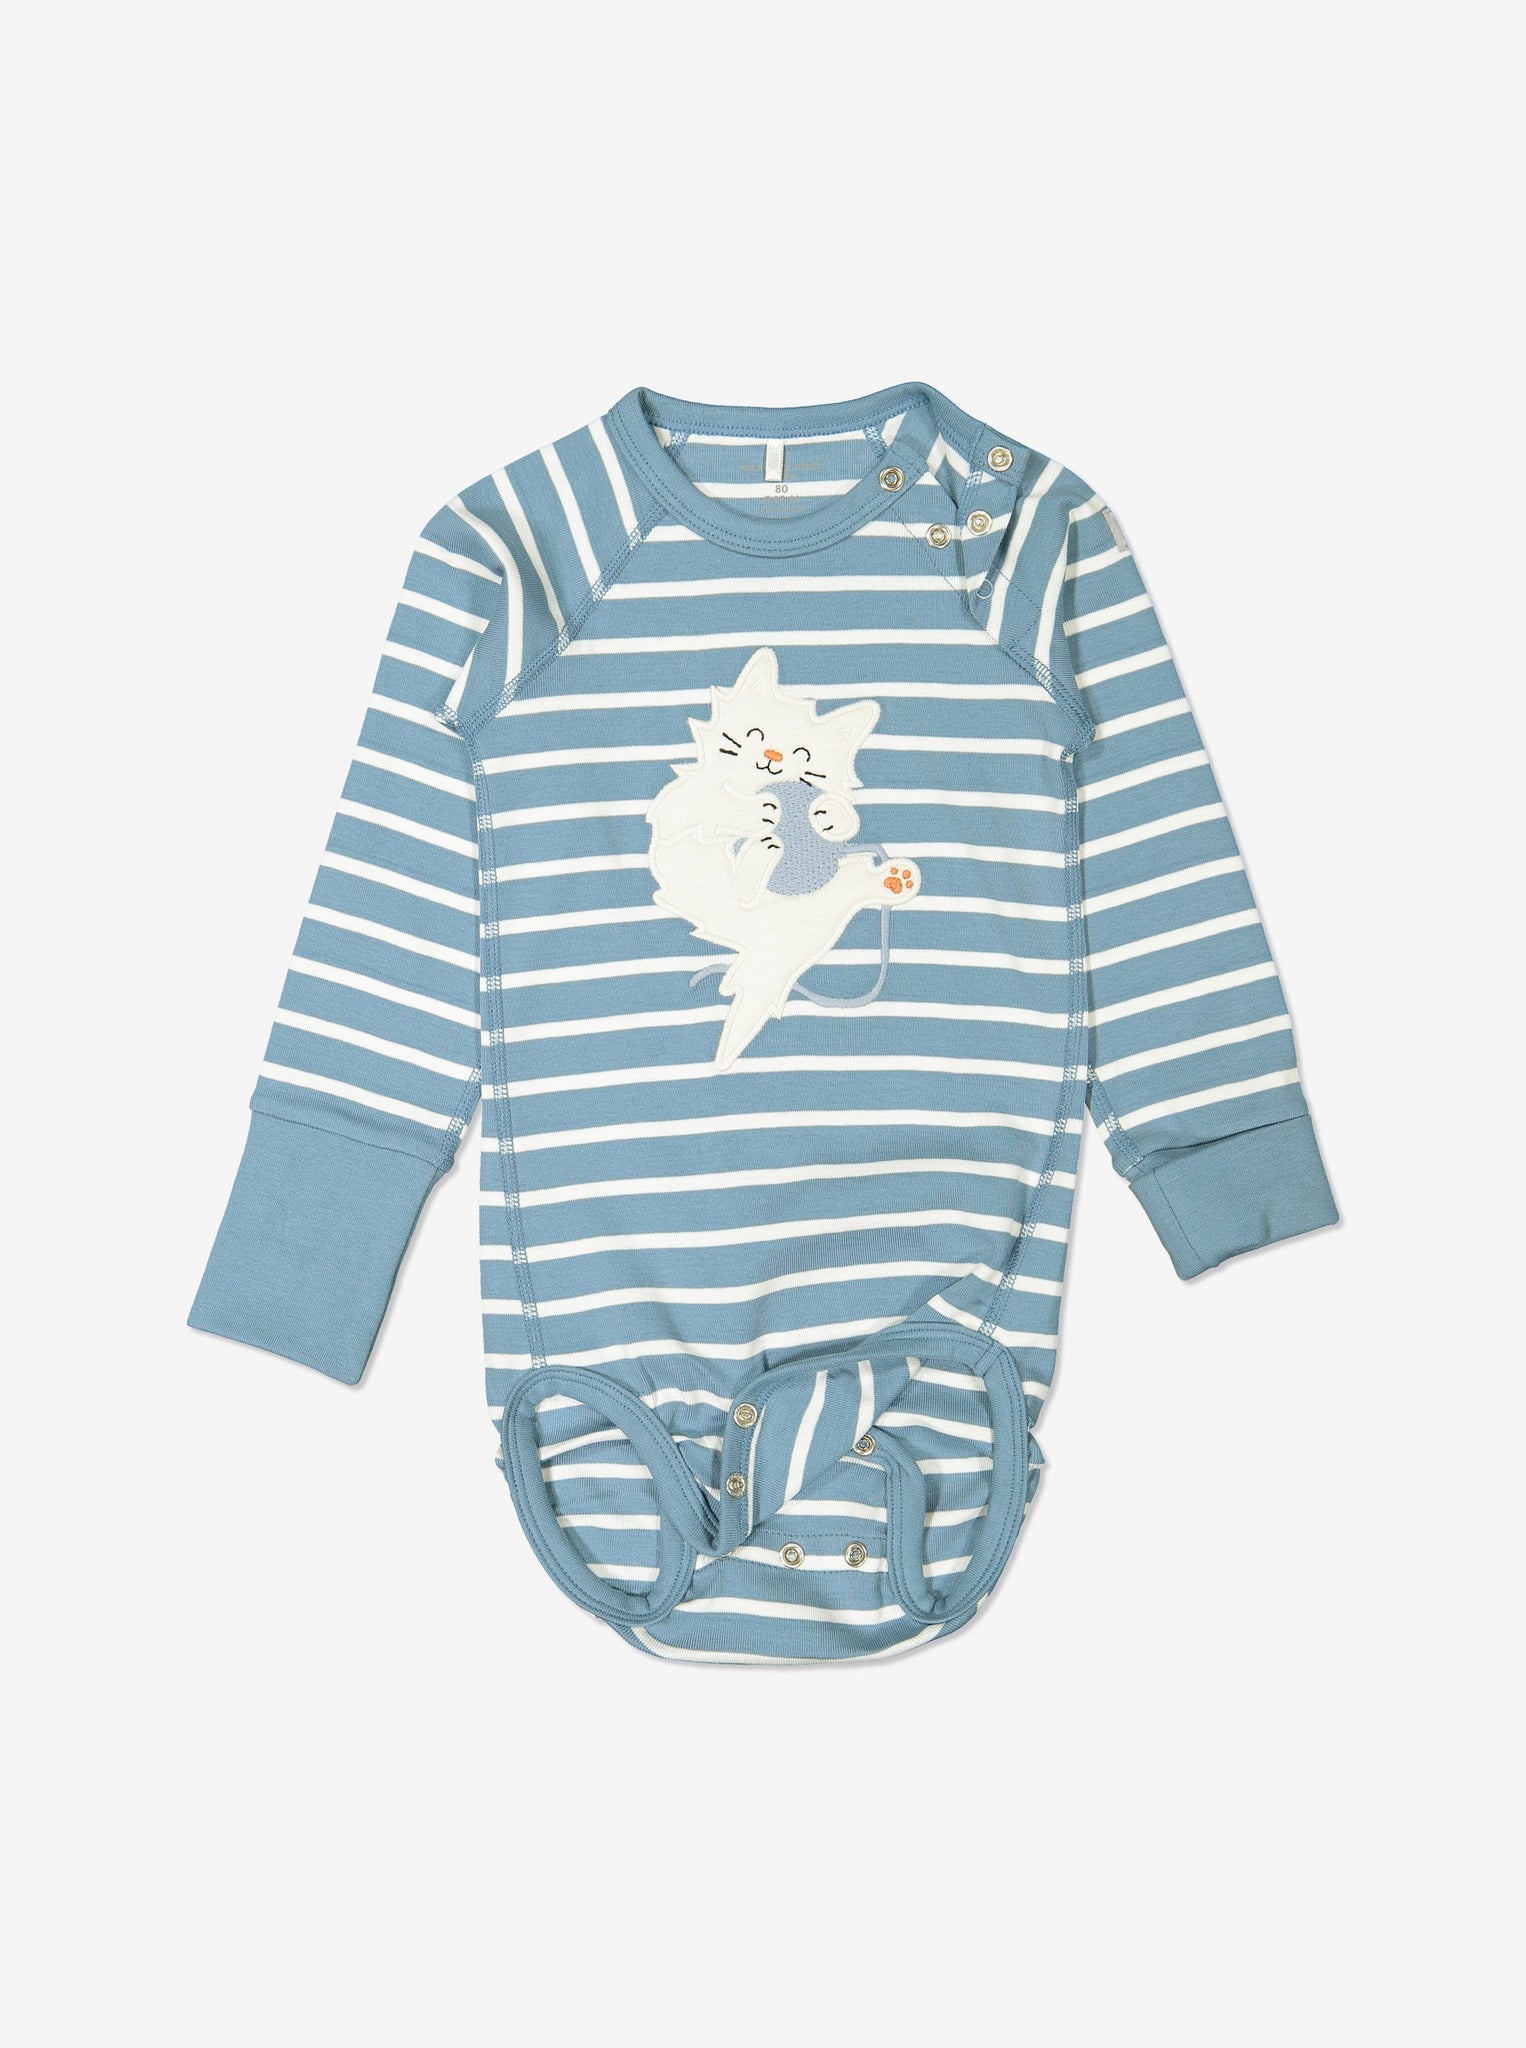 Blue and white striped babygrow for babies with poppers on one shoulder for easy dressing, made from GOTS organic cotton fabric with fun kitten playing with ball applique